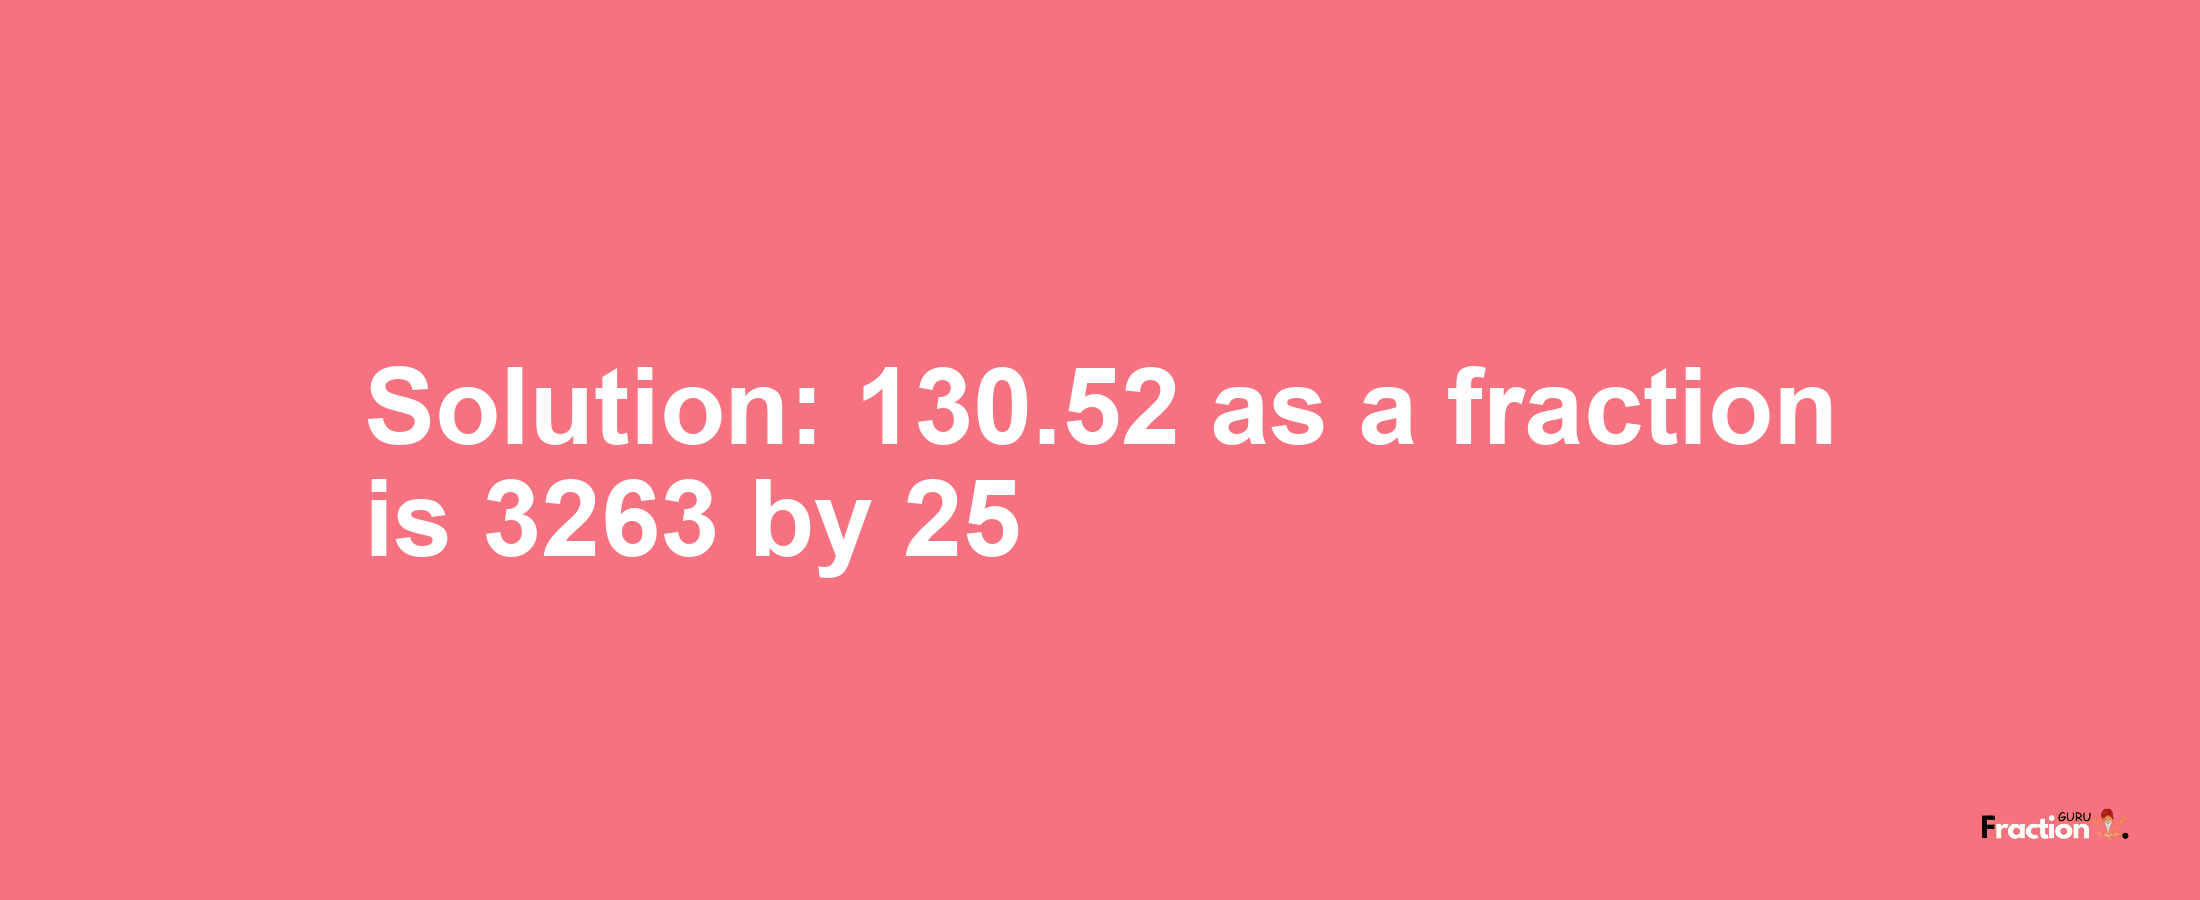 Solution:130.52 as a fraction is 3263/25